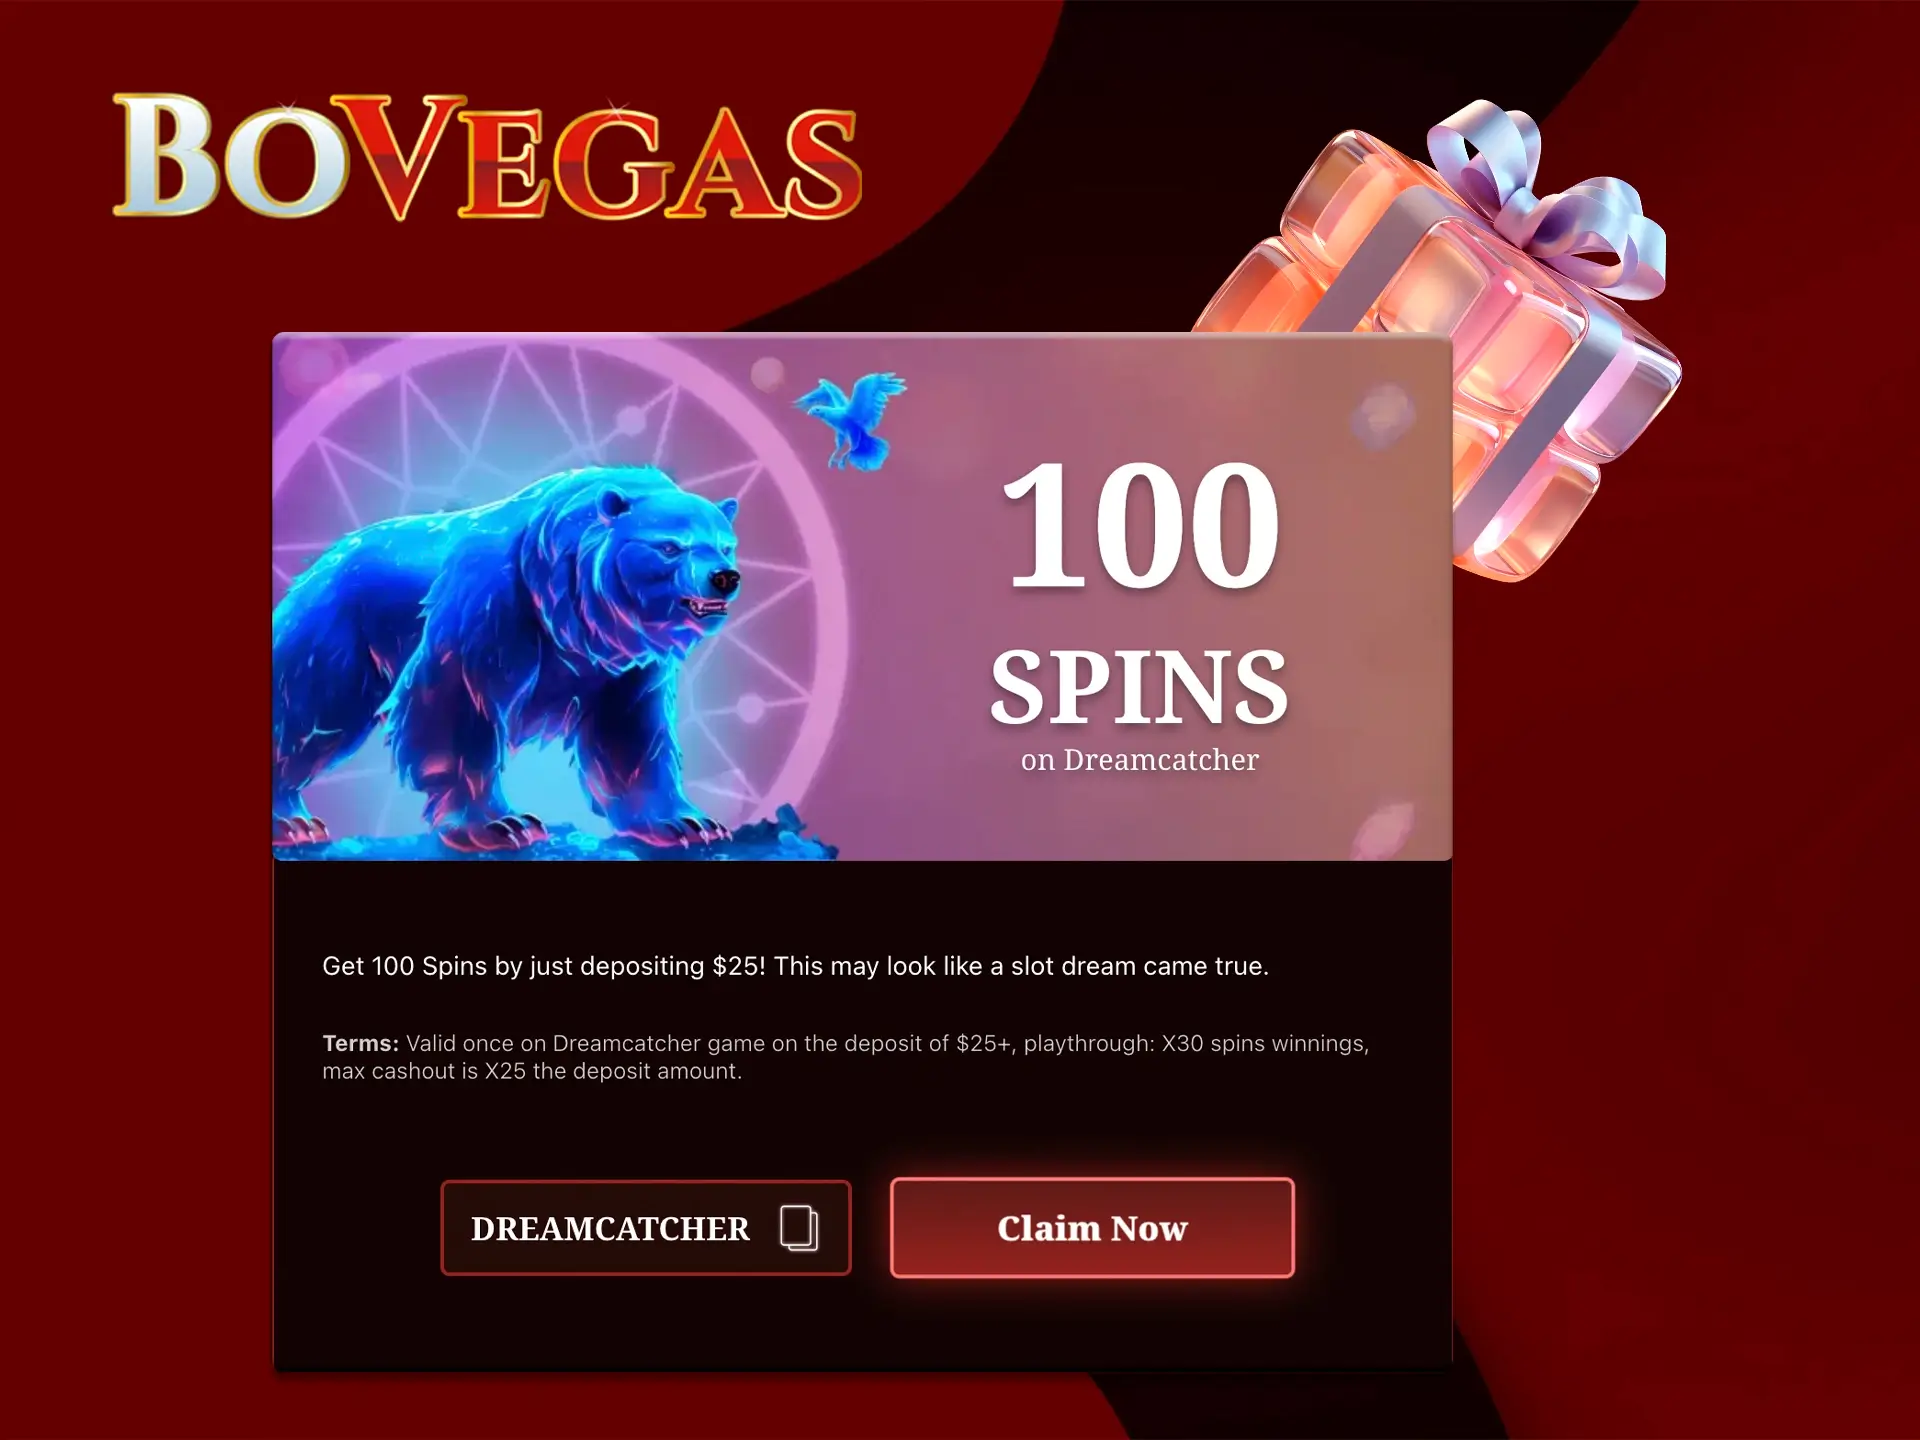 Use a special promo code and get BoVegas 100 free chips for the Dreamcatcher slot.